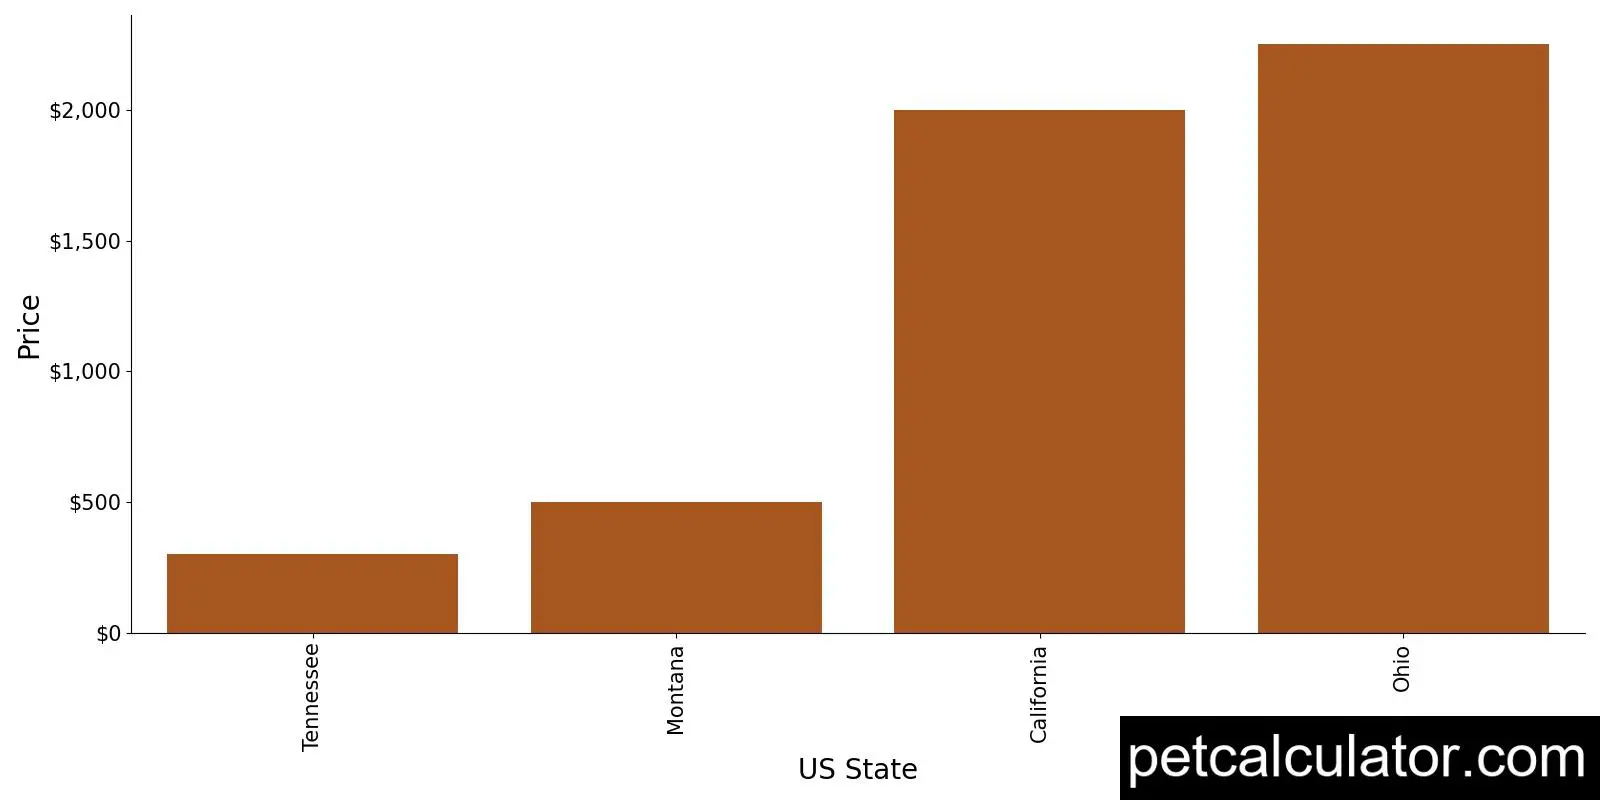 Price of Leonberger by US State 